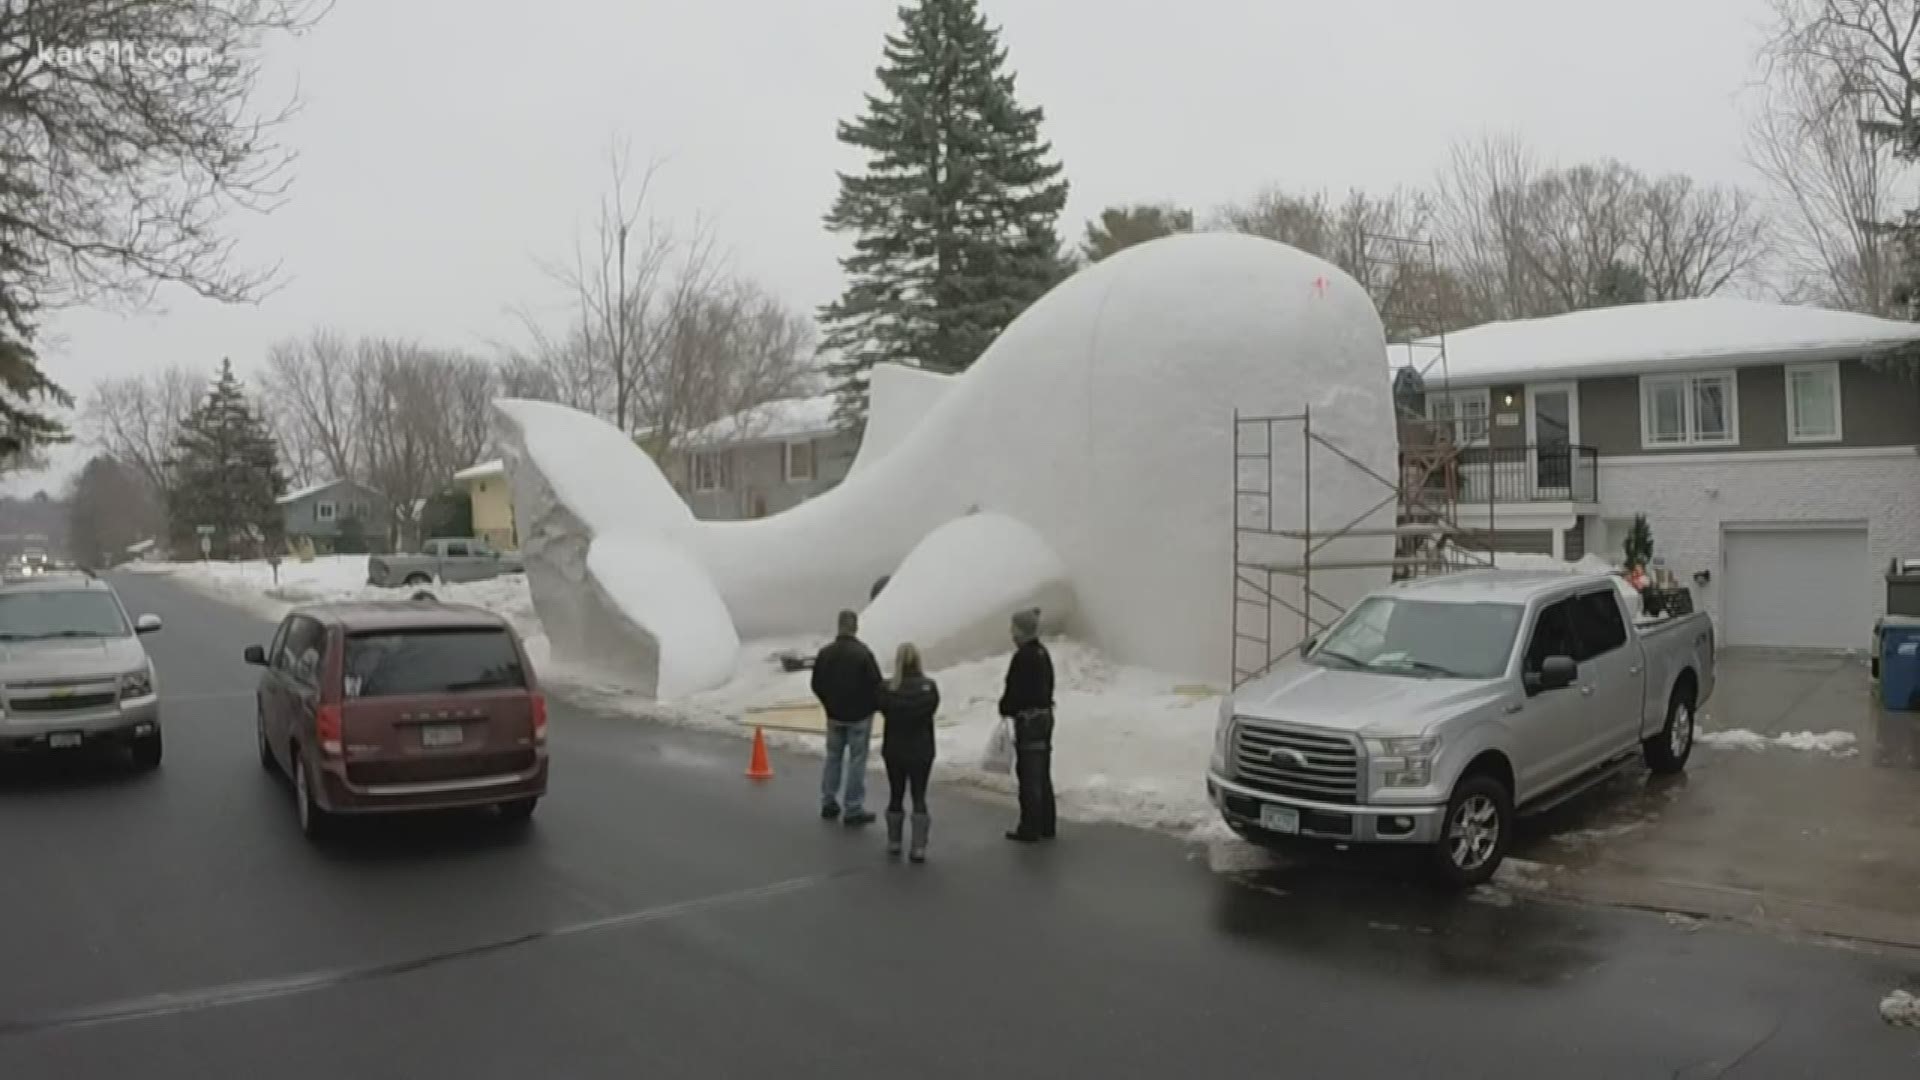 A holiday tradition like no other is taking shape in New Brighton. This year, the Bartz brothers are creating a huge whale made out of snow in their front yard.